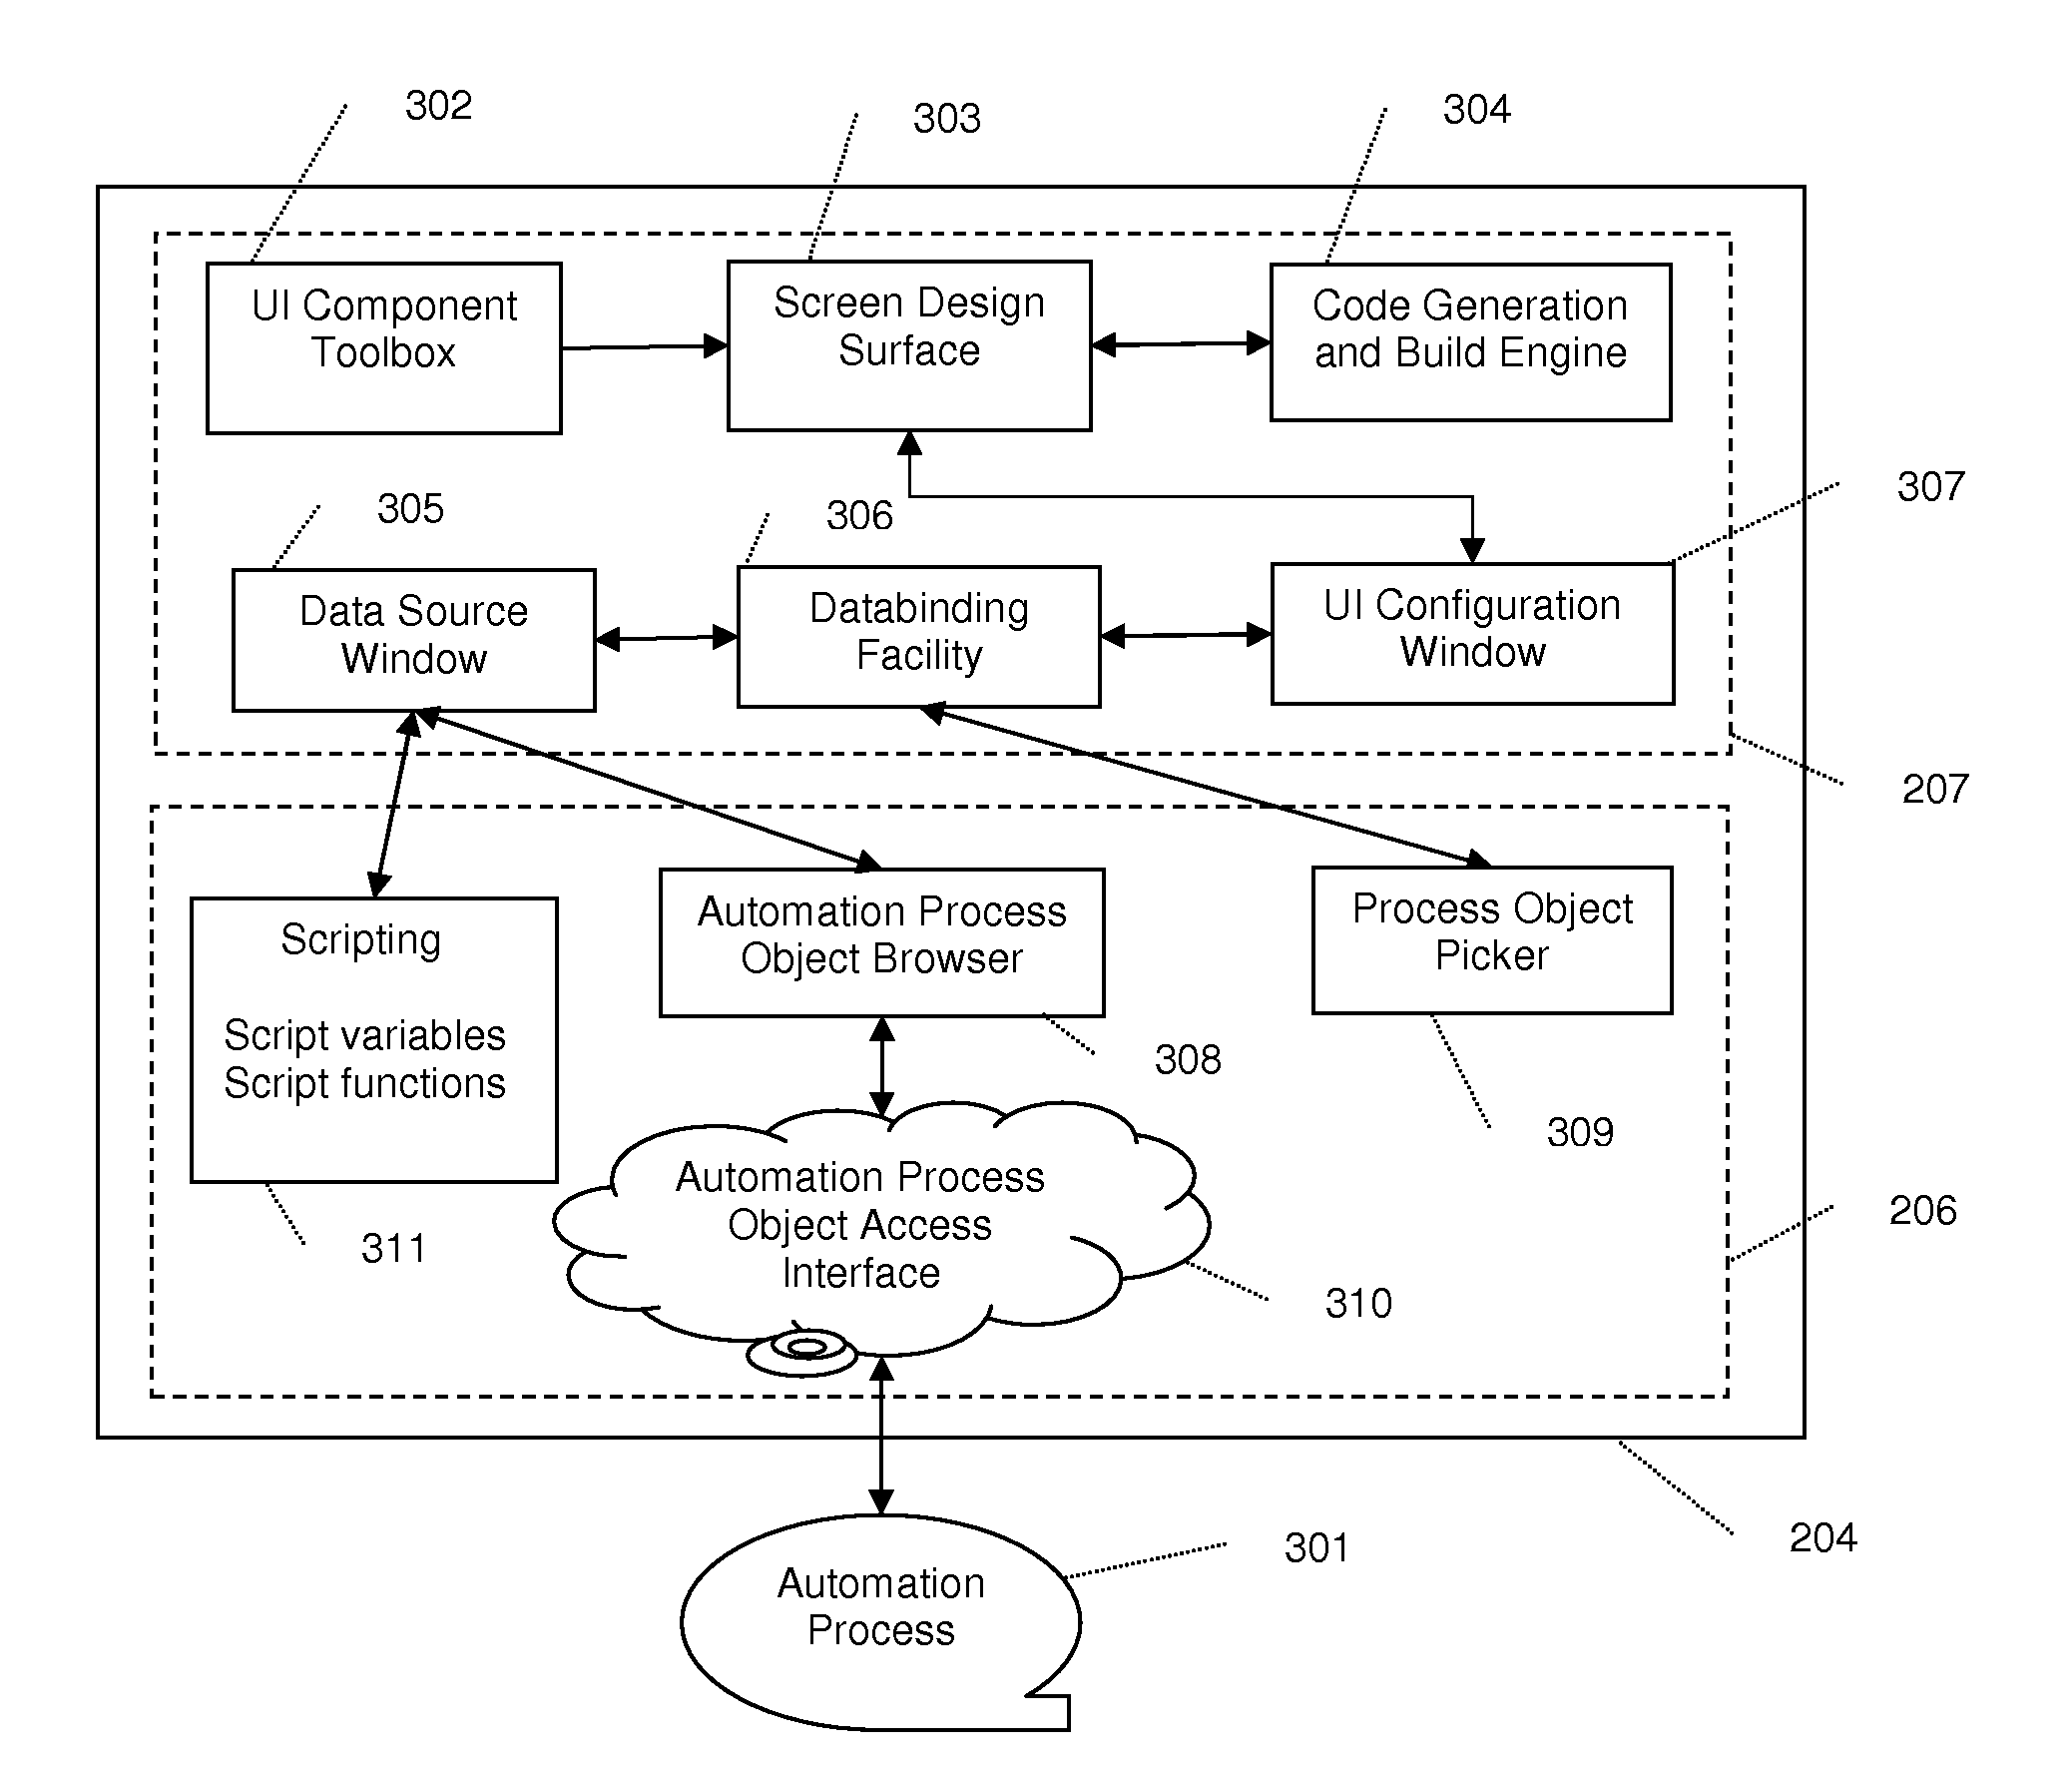 Method and system for creating HMI applications for an automation process